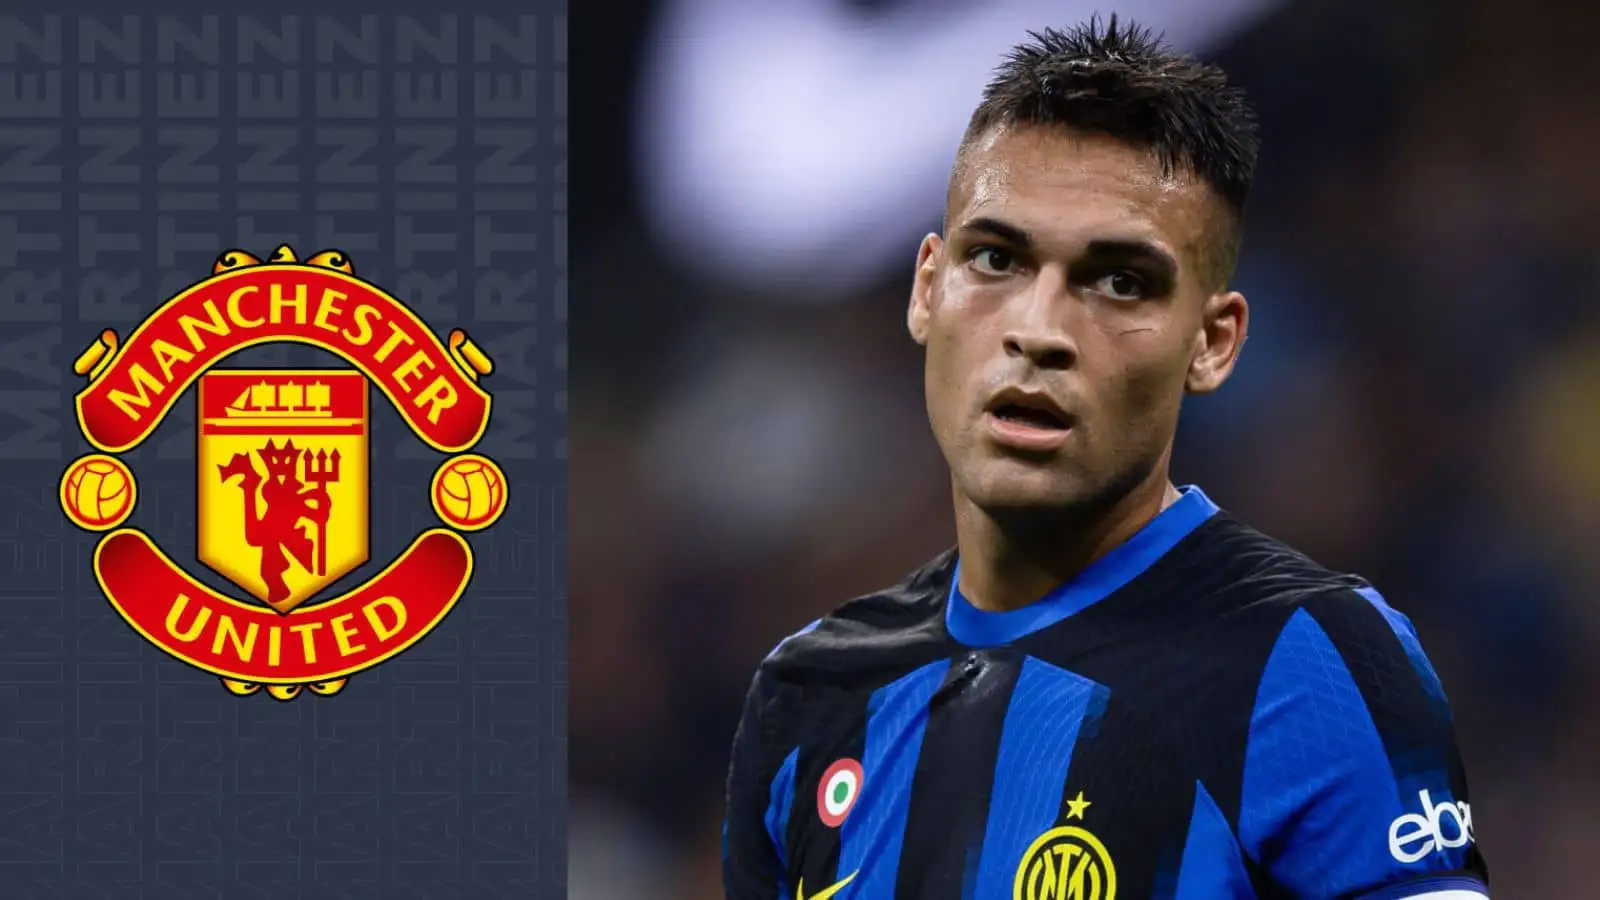 Man Utd are being linked with €150m-rated Inter striker Lautaro Martinez